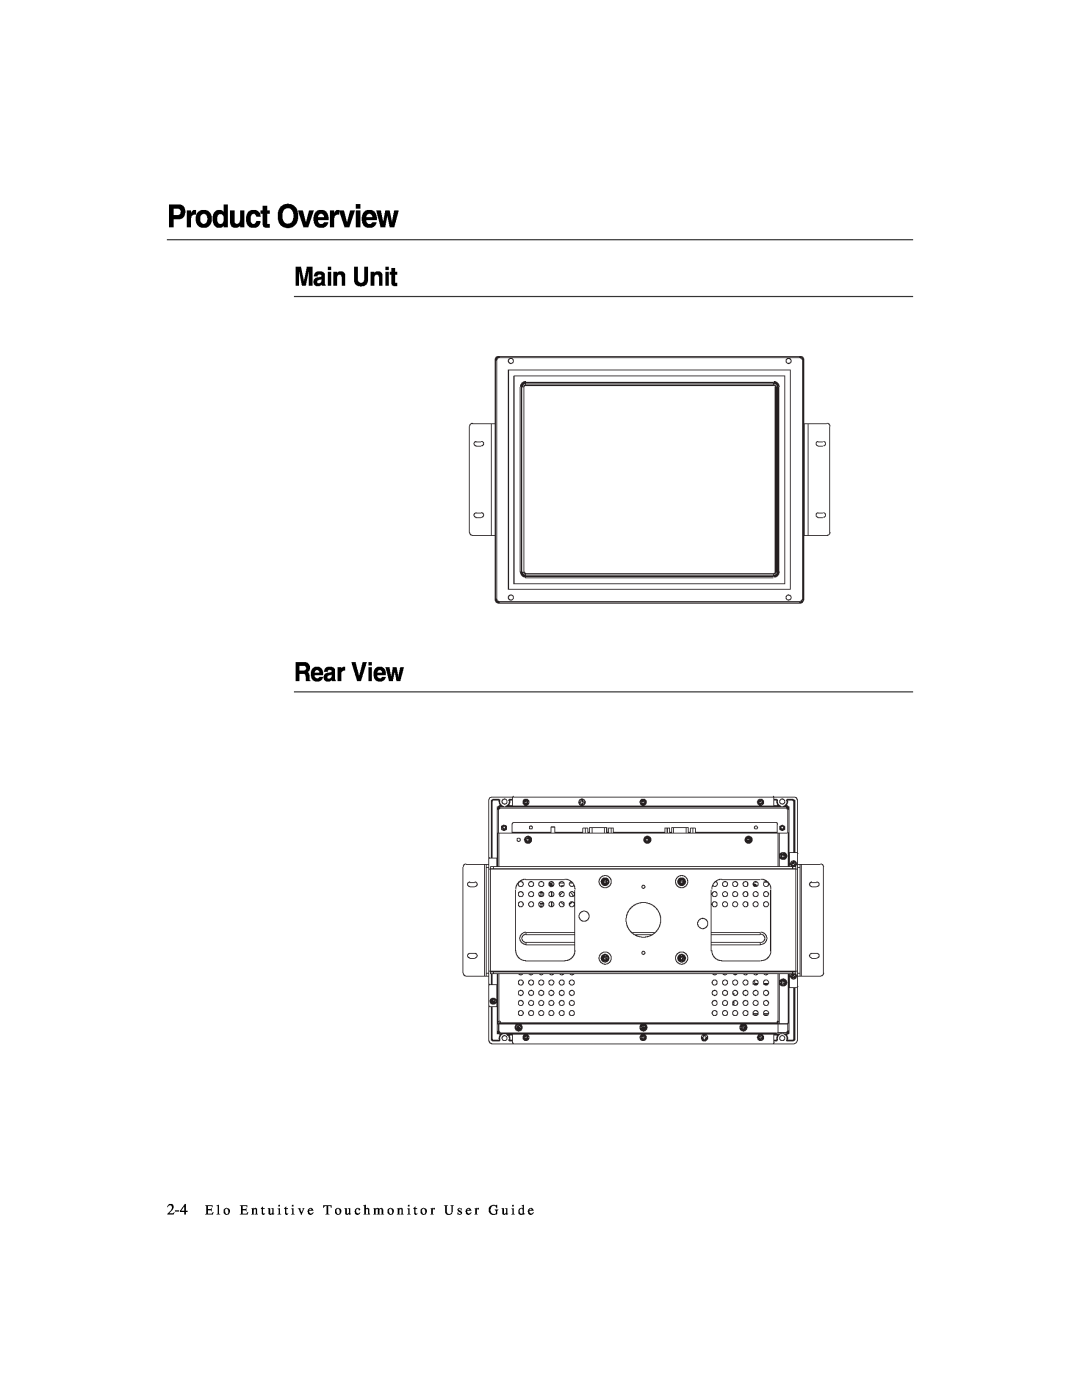 Elo TouchSystems 1247L manual Product Overview, Main Unit Rear View 